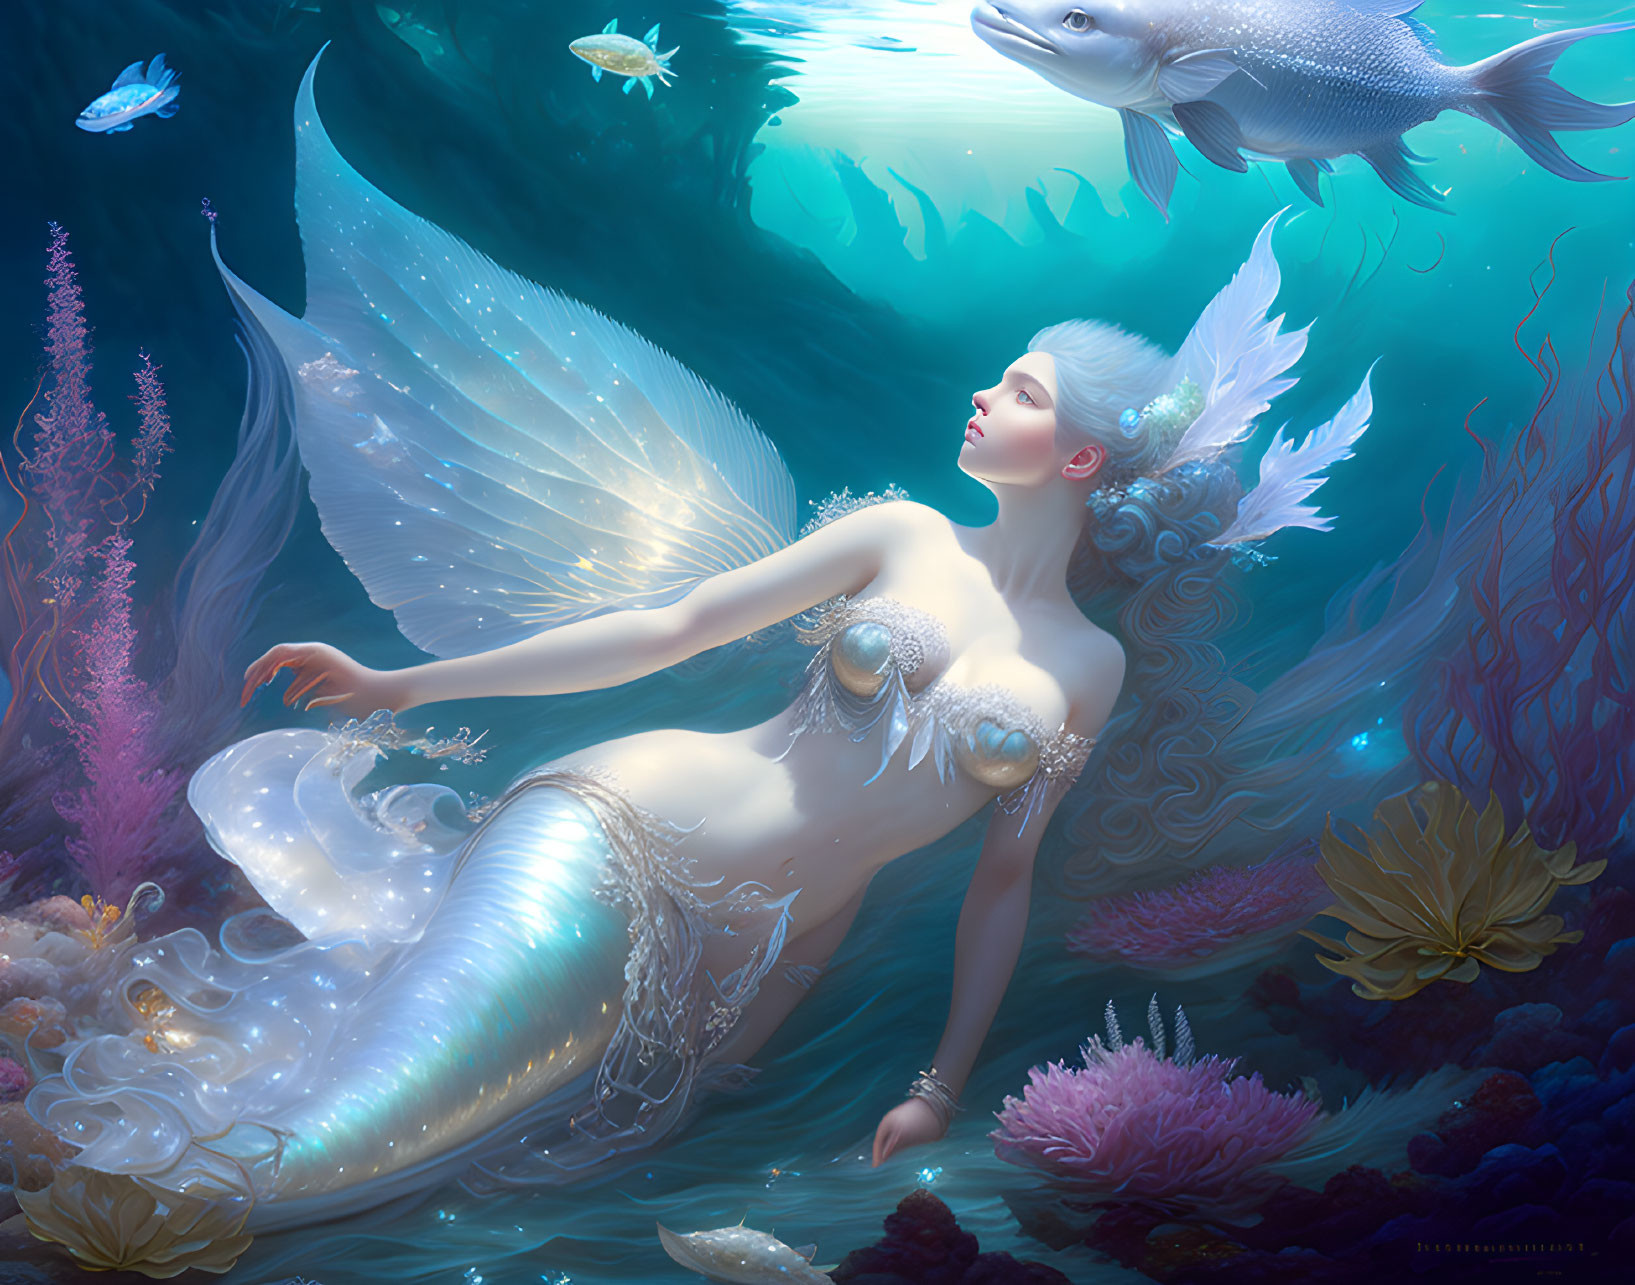 Mermaid with Shimmering Scales and Delicate Wings Among Colorful Underwater Scene